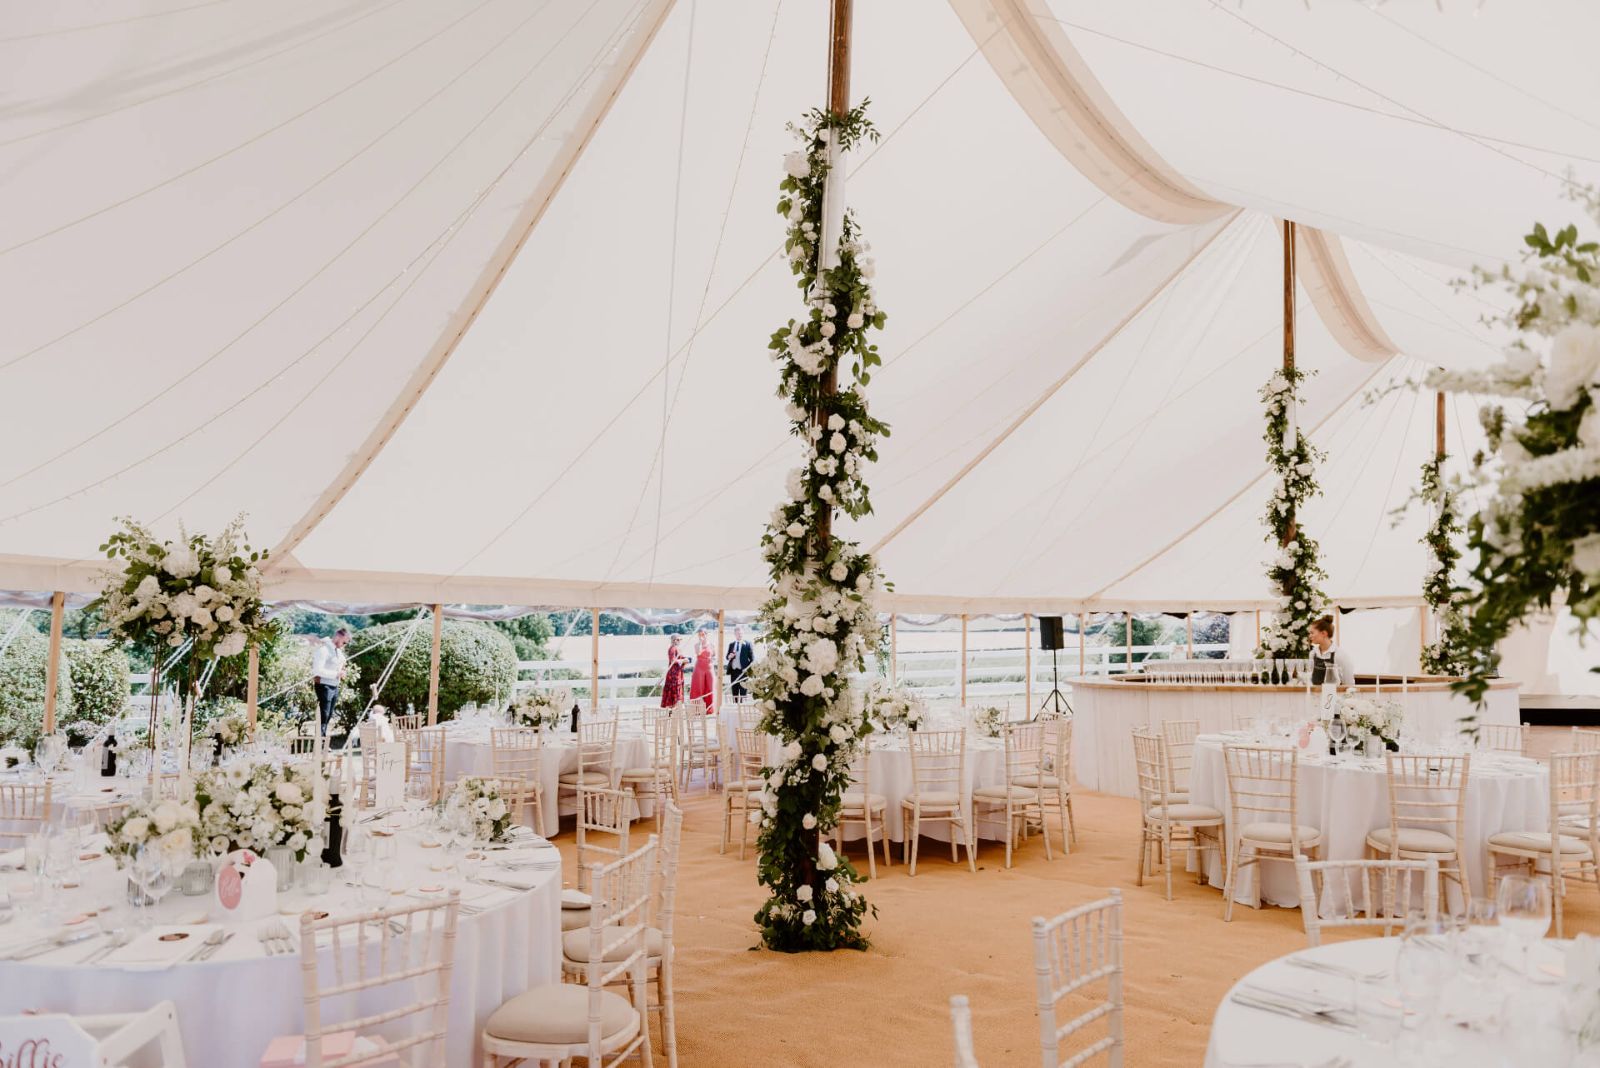 Marquee Wedding Furniture - Which Chair Do You Choose?